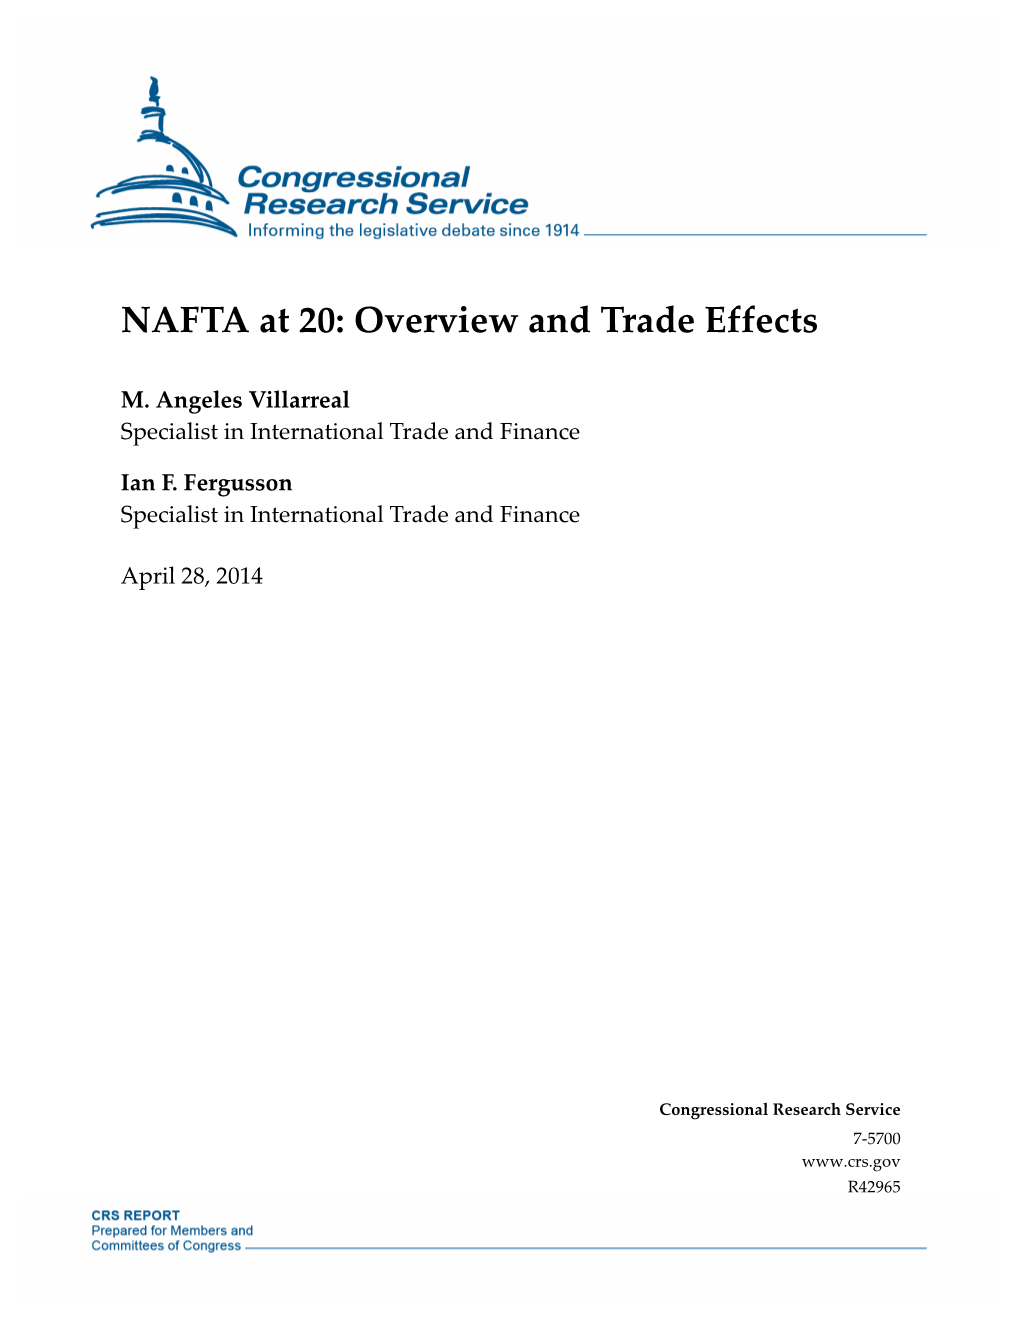 NAFTA at 20: Overview and Trade Effects